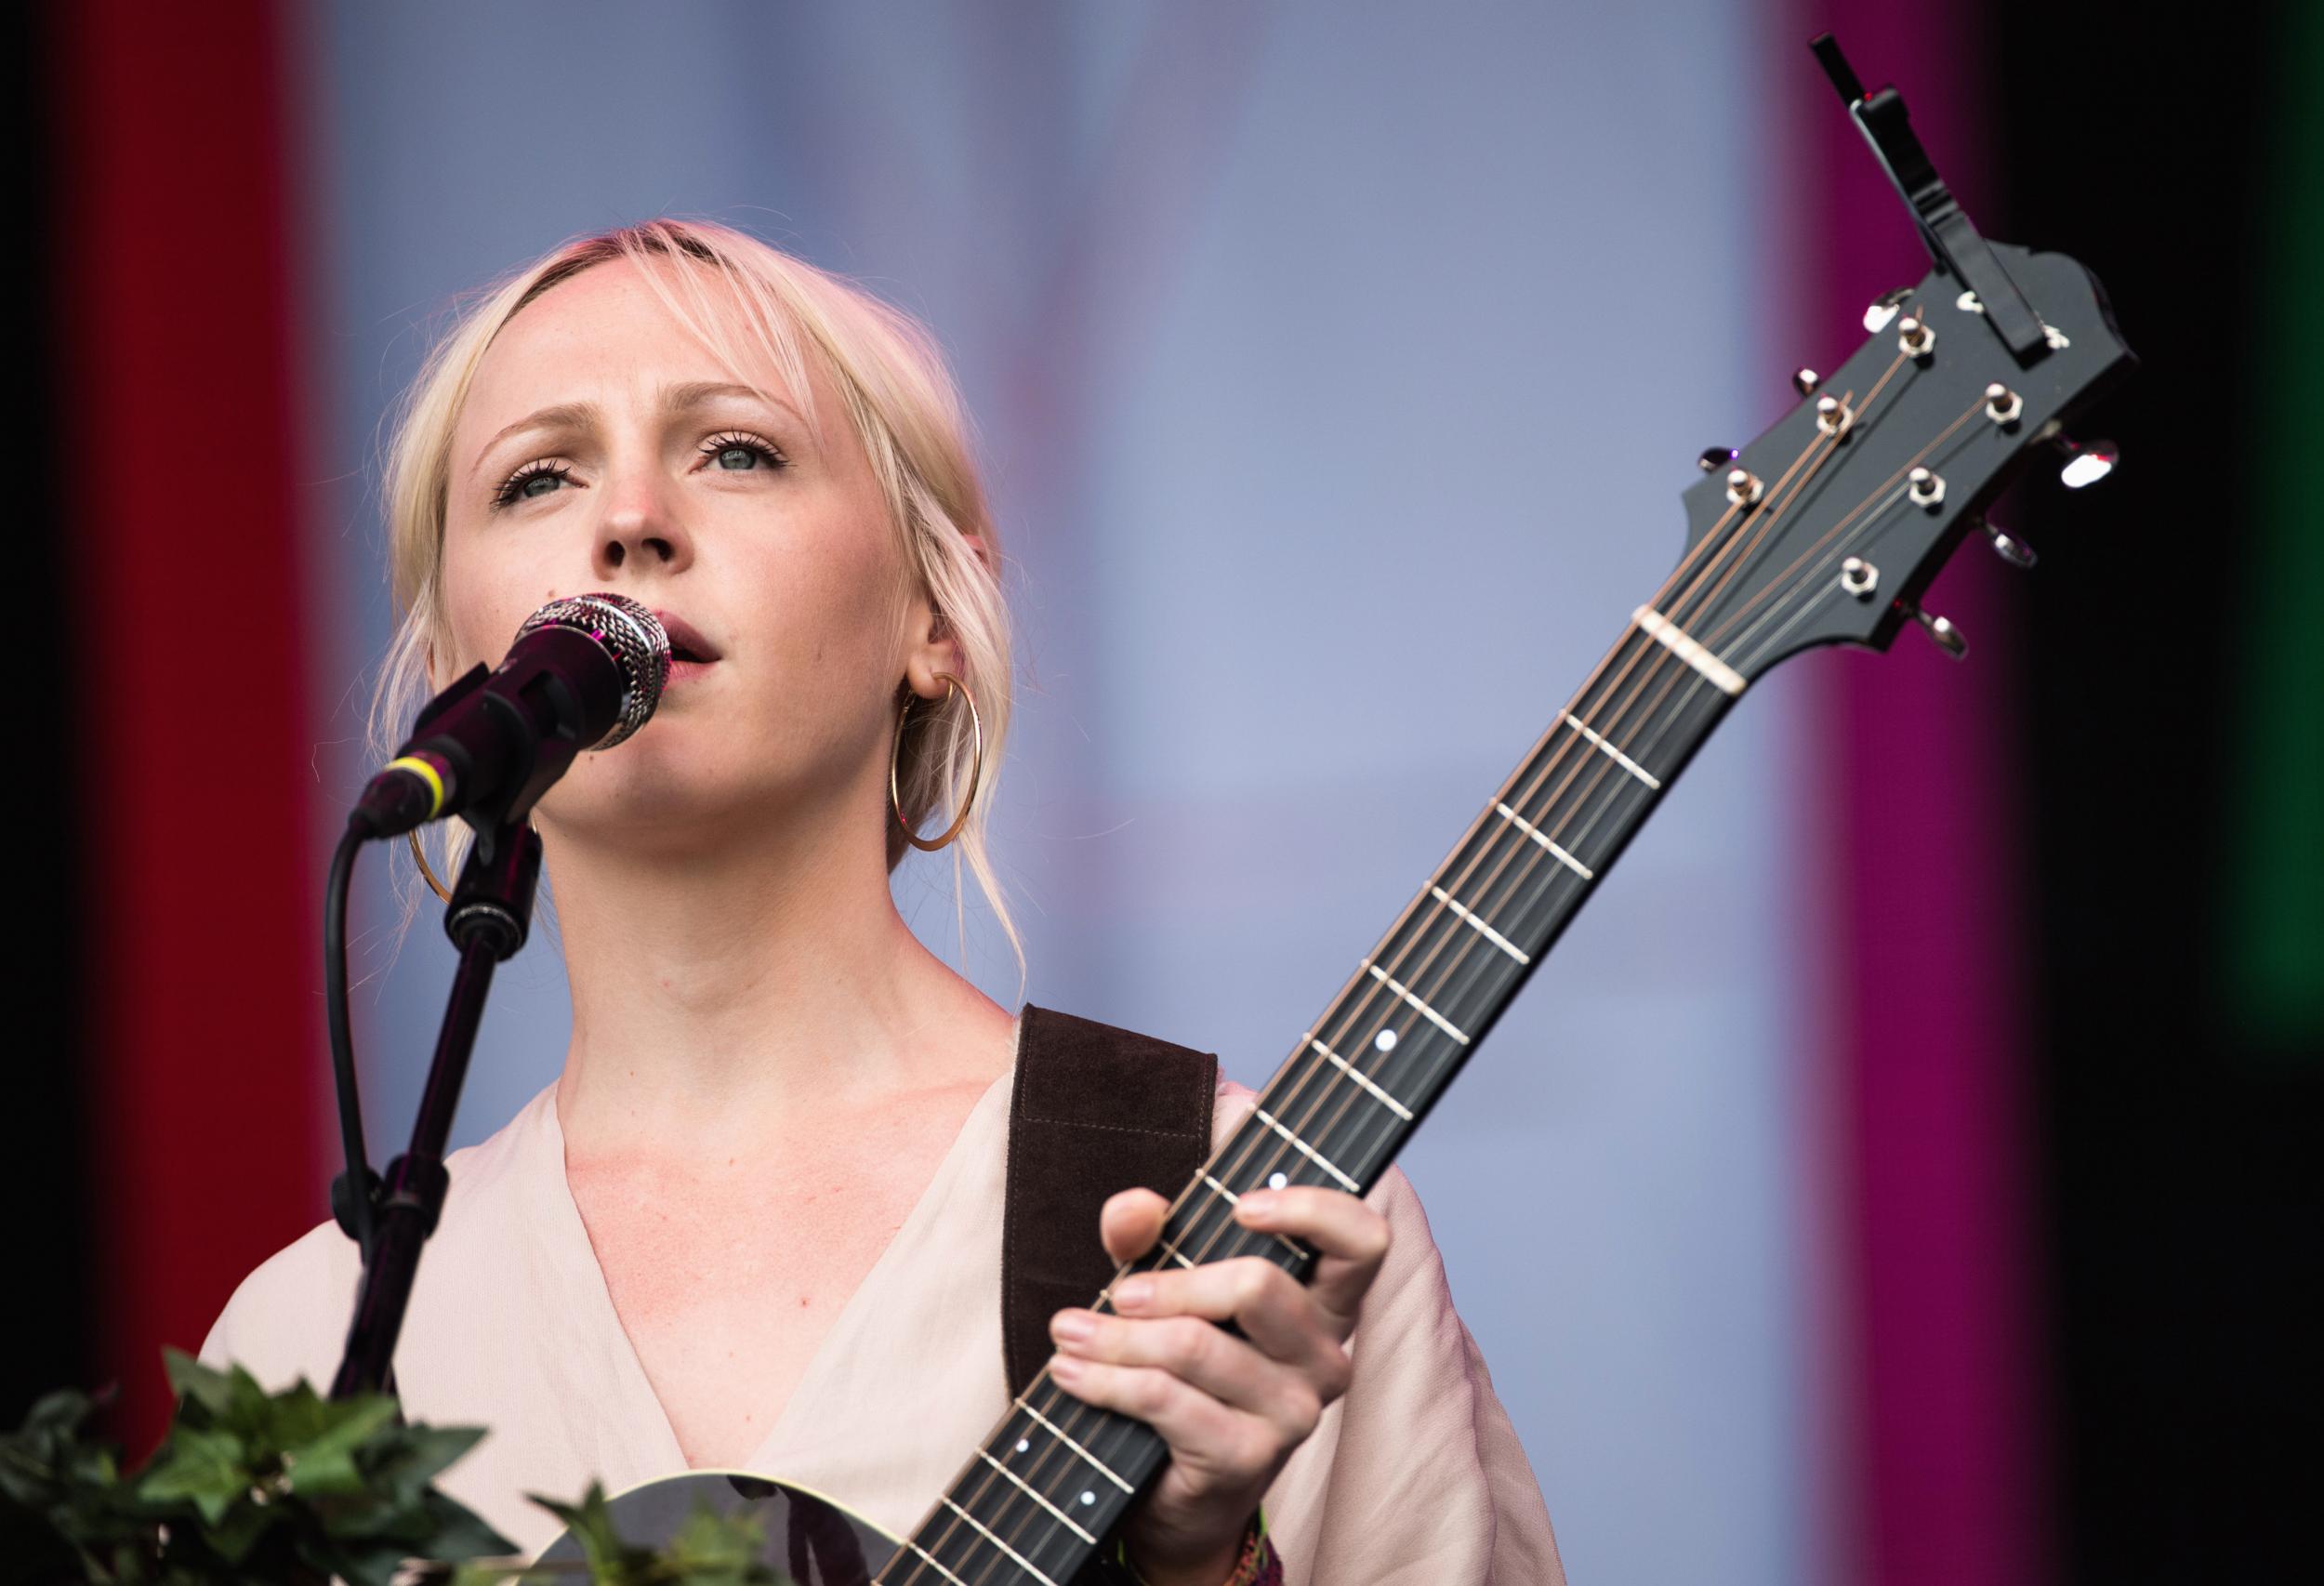 Laura Marling is releasing her new album this year